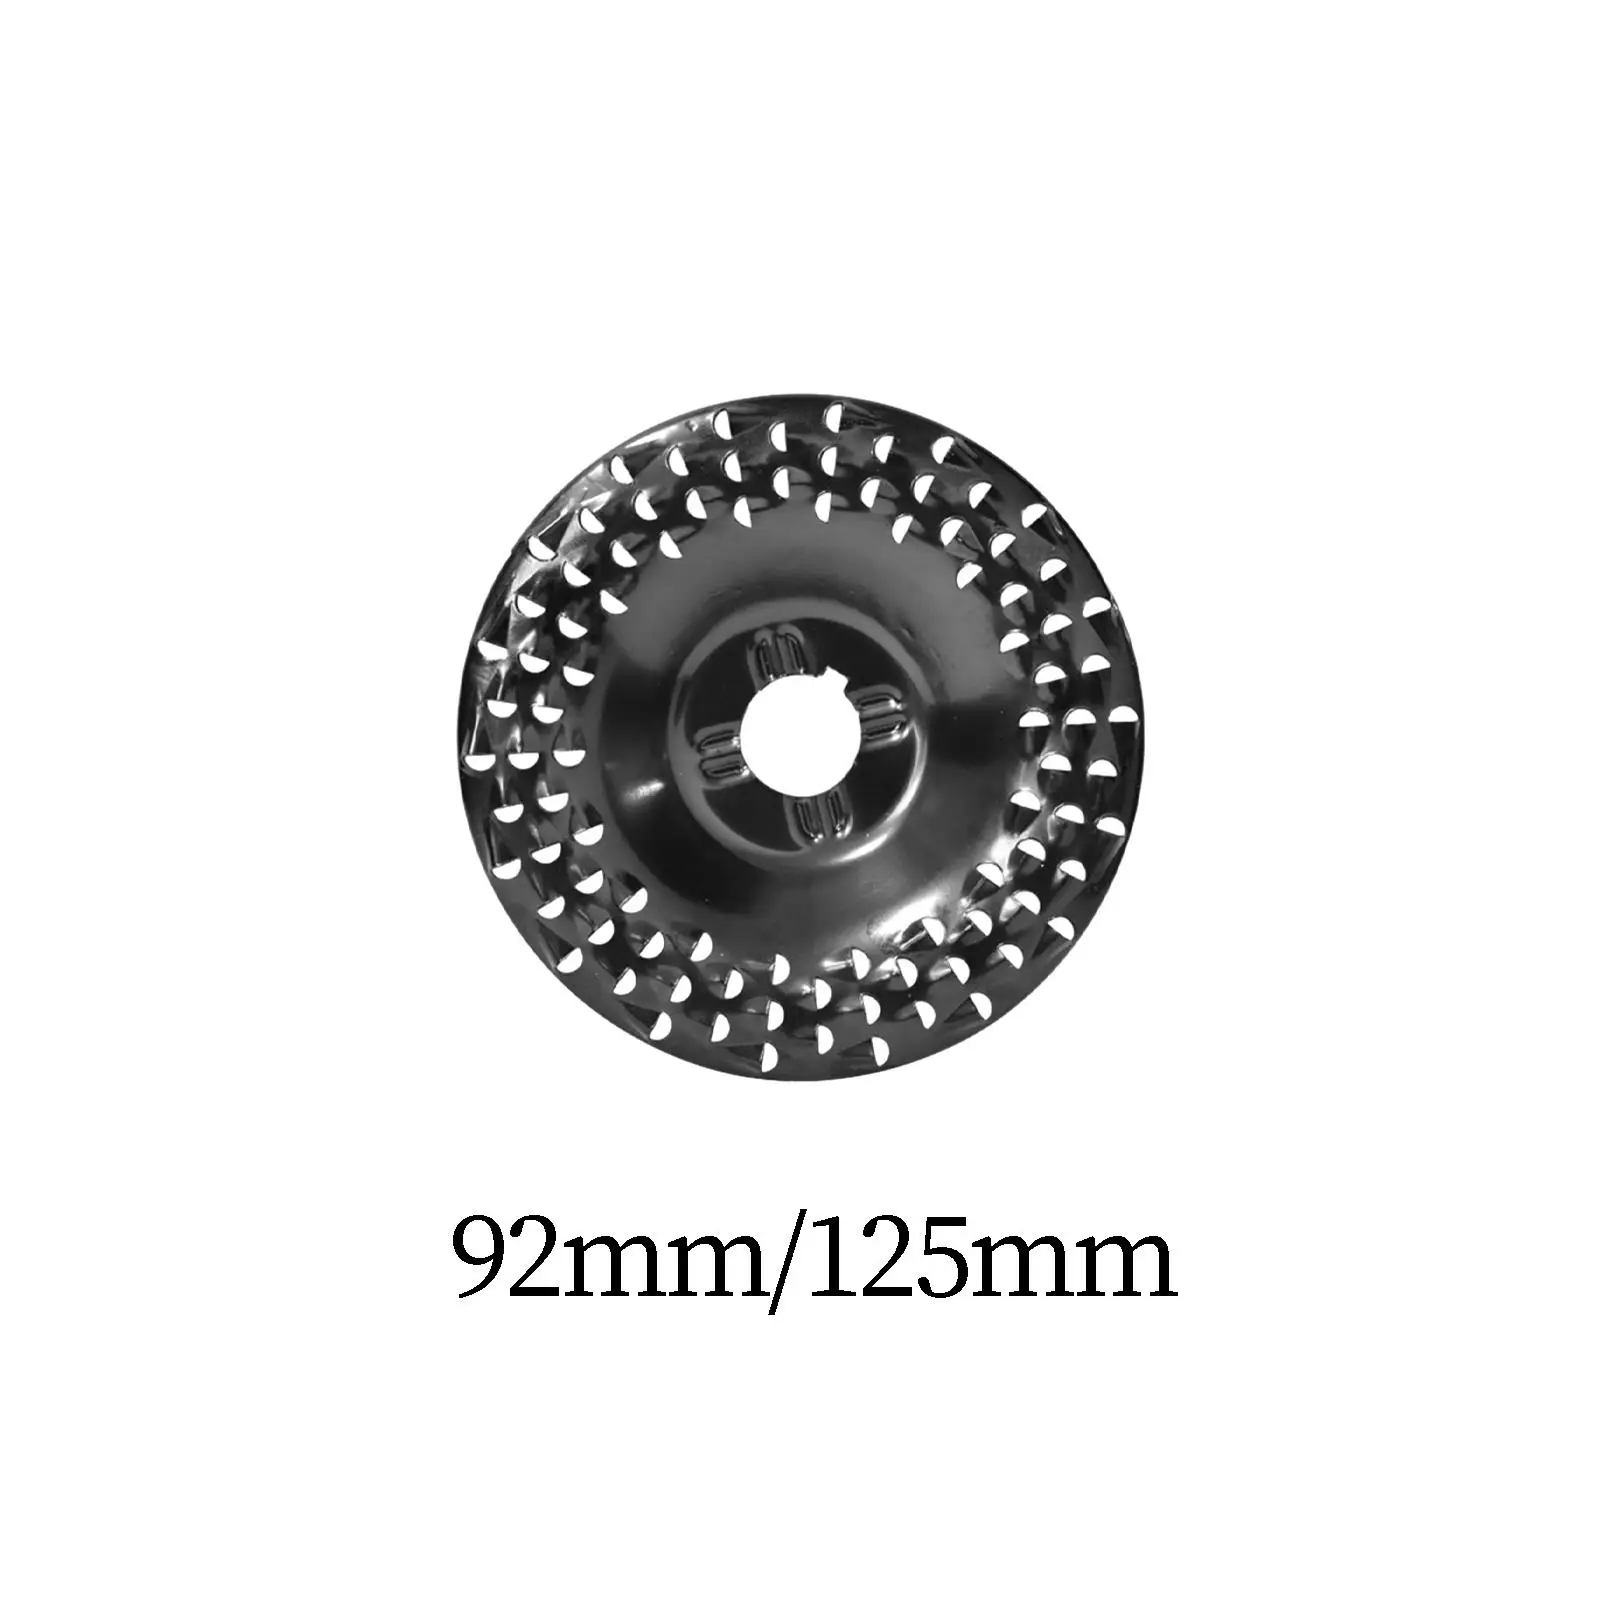 Grinder Wheel Disc Attachments Woodworking Tool Steel 92mm/125mm Spare Parts Sturdy Wood Cutting Angle Grinder Carving Disc